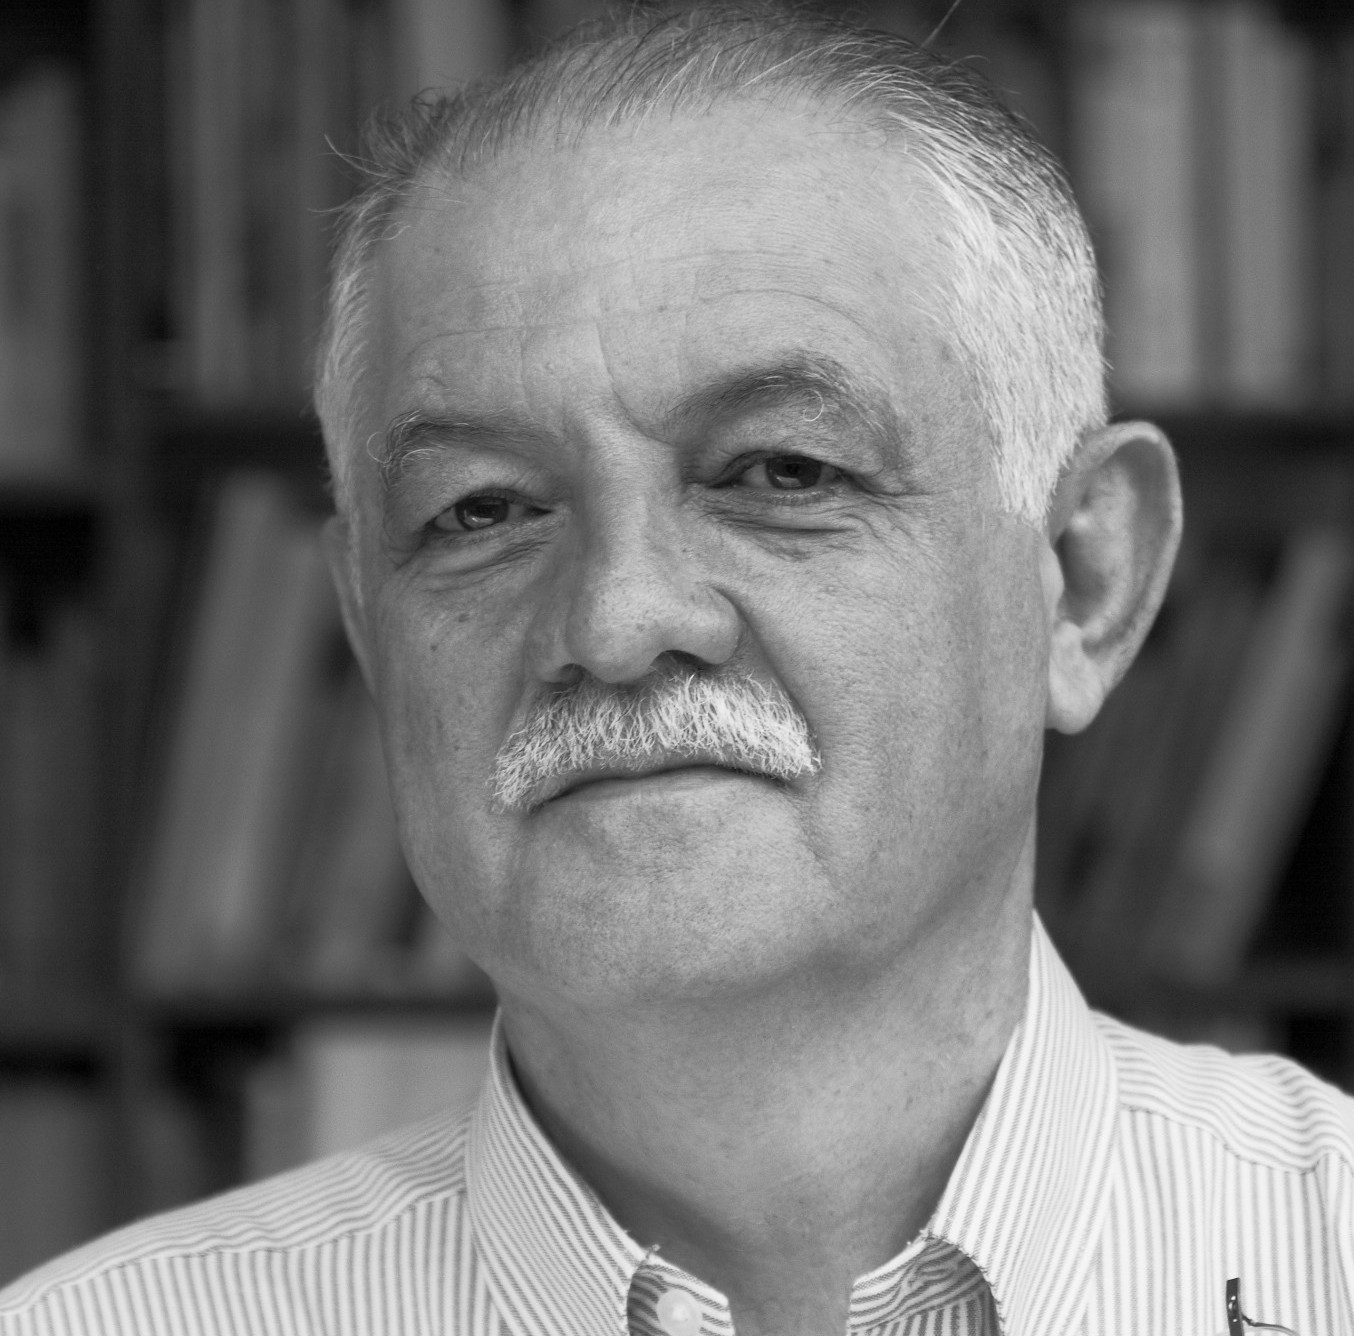 Antonio Azuela is wearing a striped shirt, standing in front of a bookshelf, which is blurred in the picture. The photo is in black and white. 